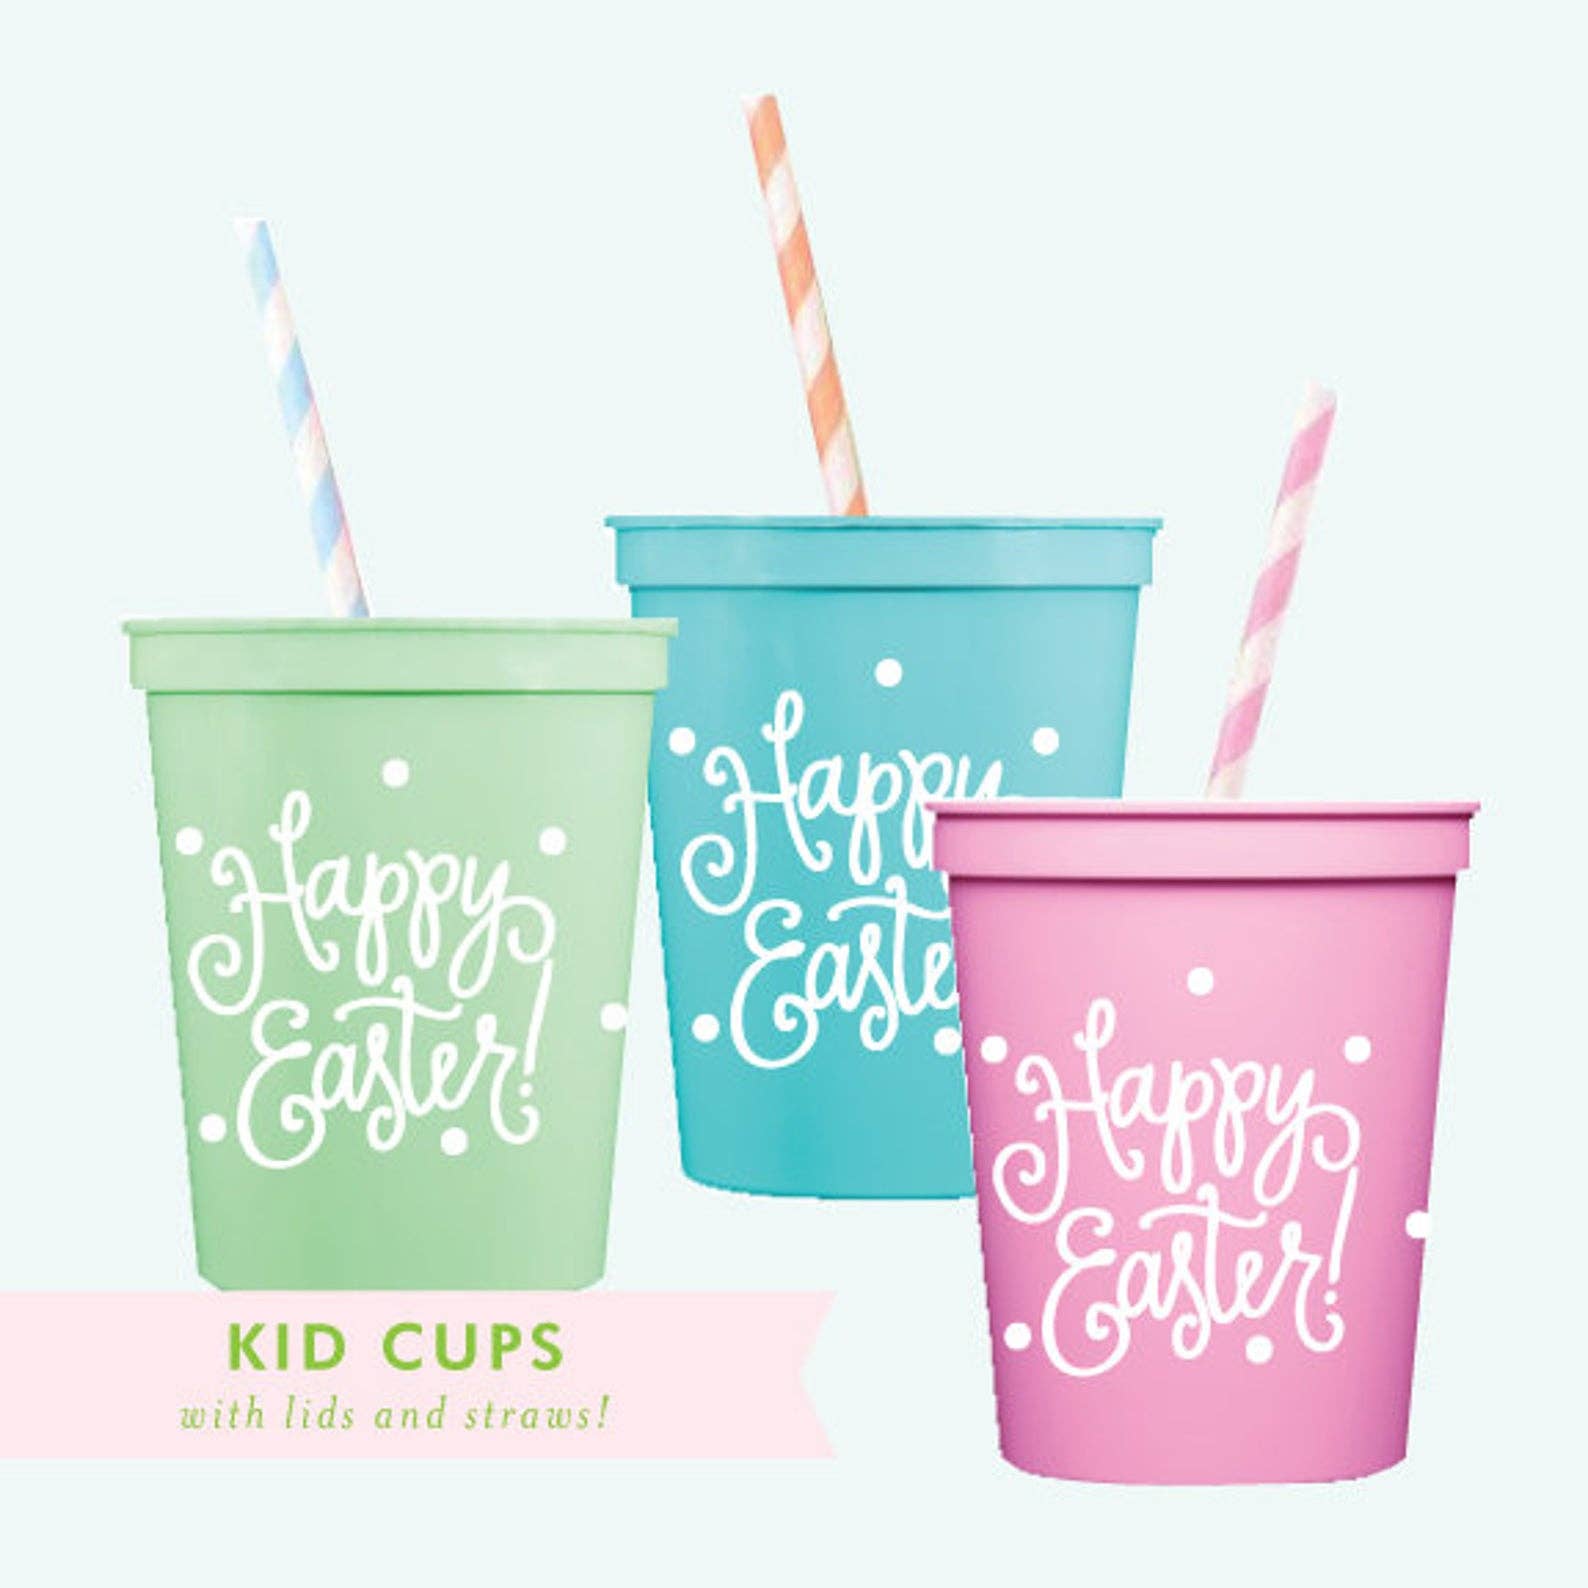 Happy Easter! | Kids Cups with Lids (3 colors) - Oh My Darling Party Co-bachelorette party cupsBoutique Party Cupseaster #Fringe_Backdrop#